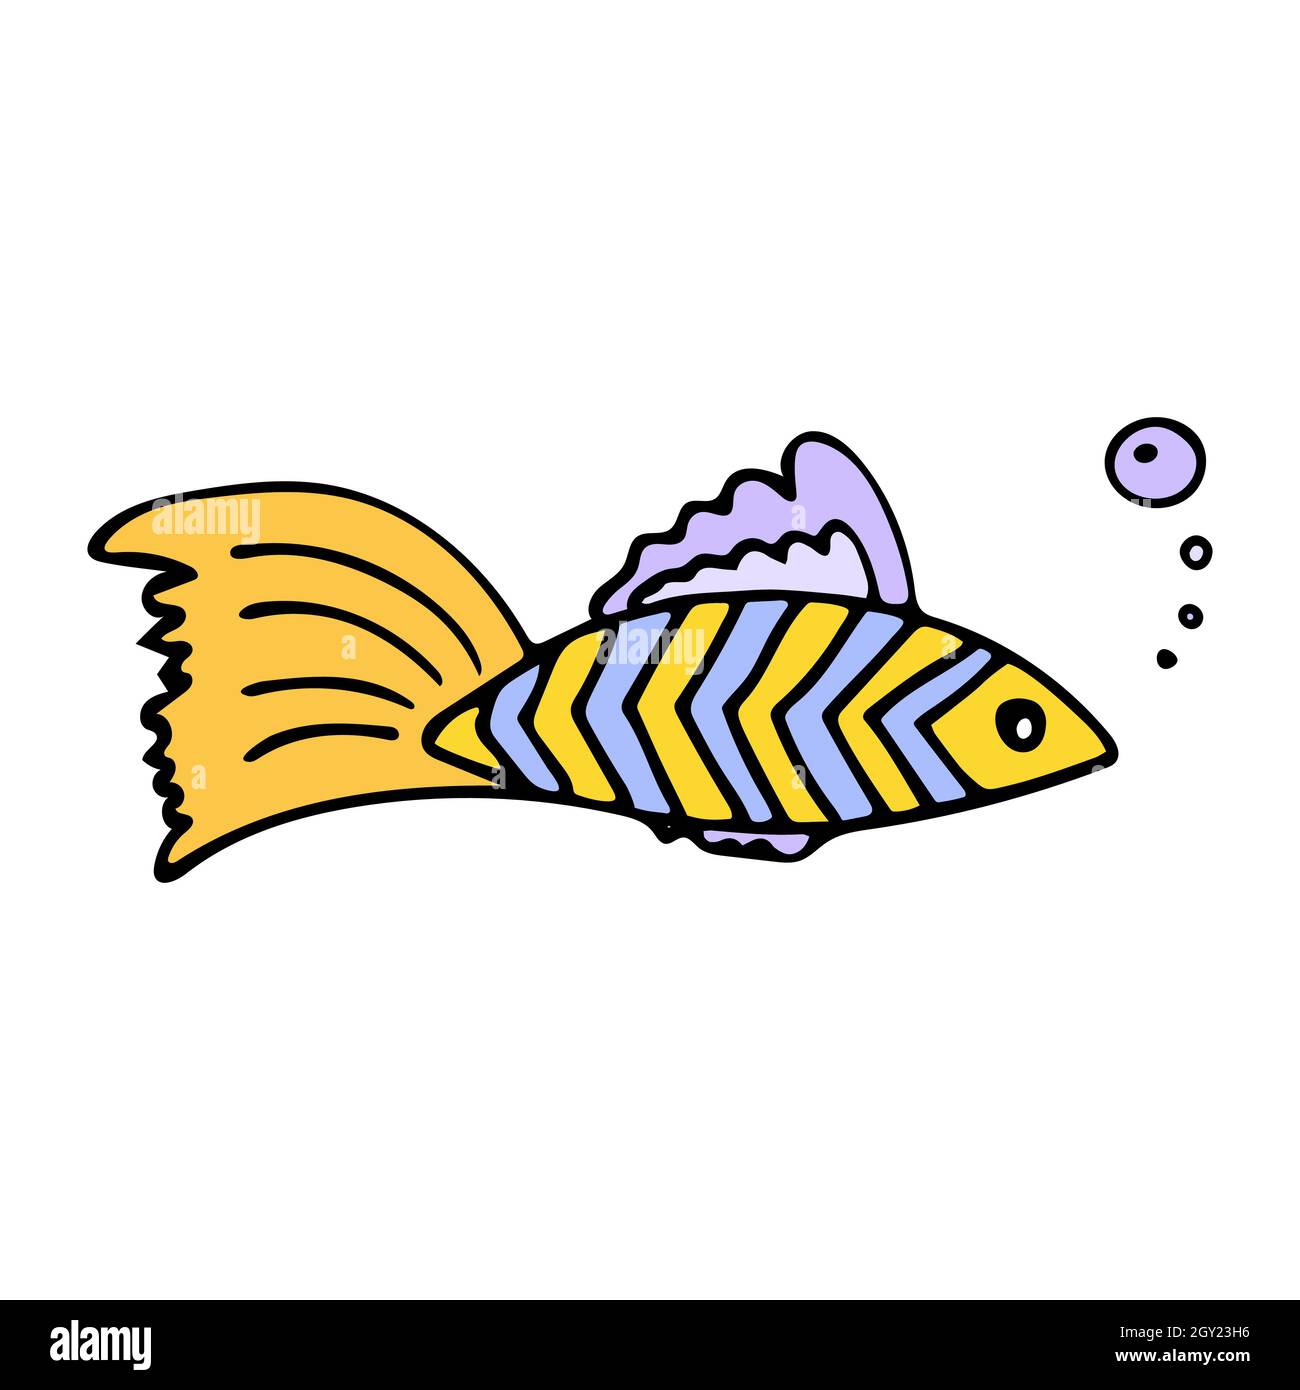 Colored fish with air bubbles in doodle style. Design elements. Stock Vector